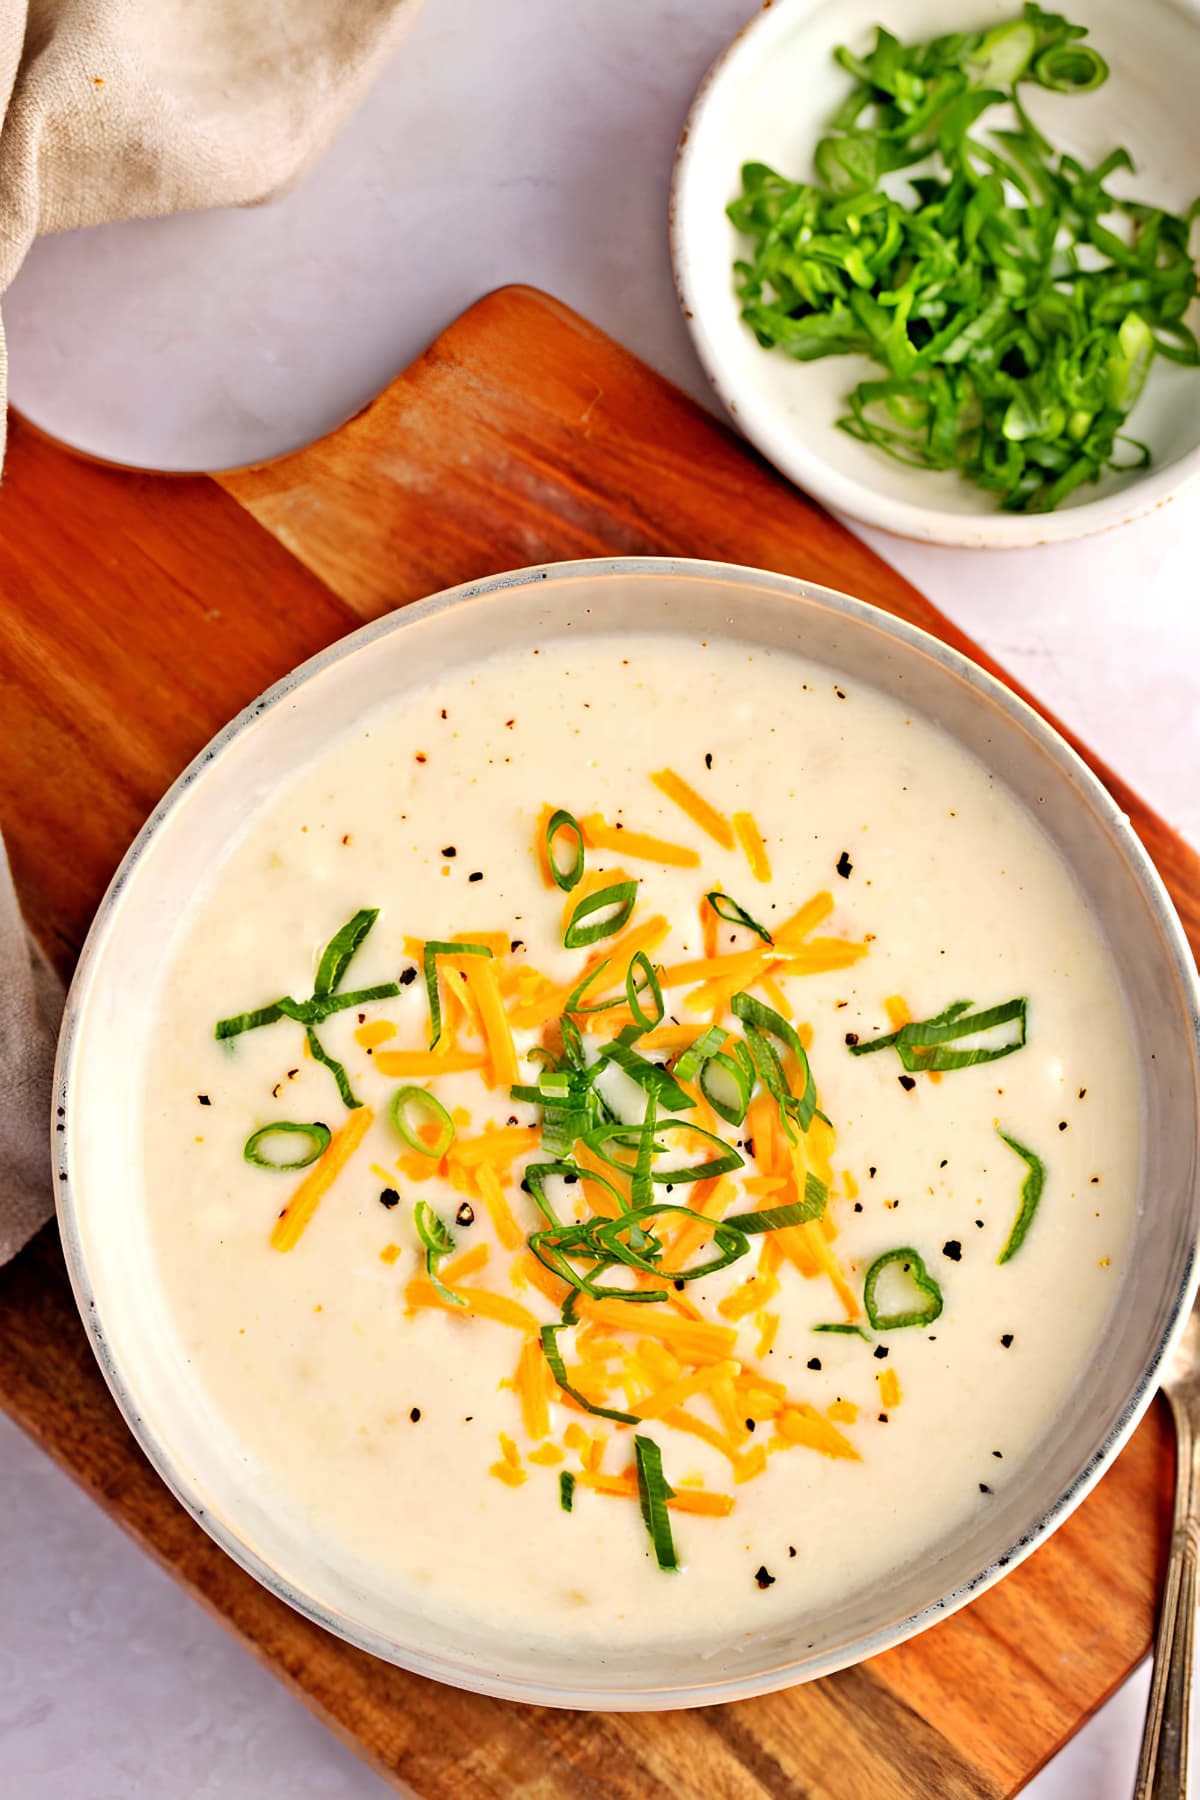 Bowl of Panera bread potato soup garnished with grated cheese and chopped onion leaves.